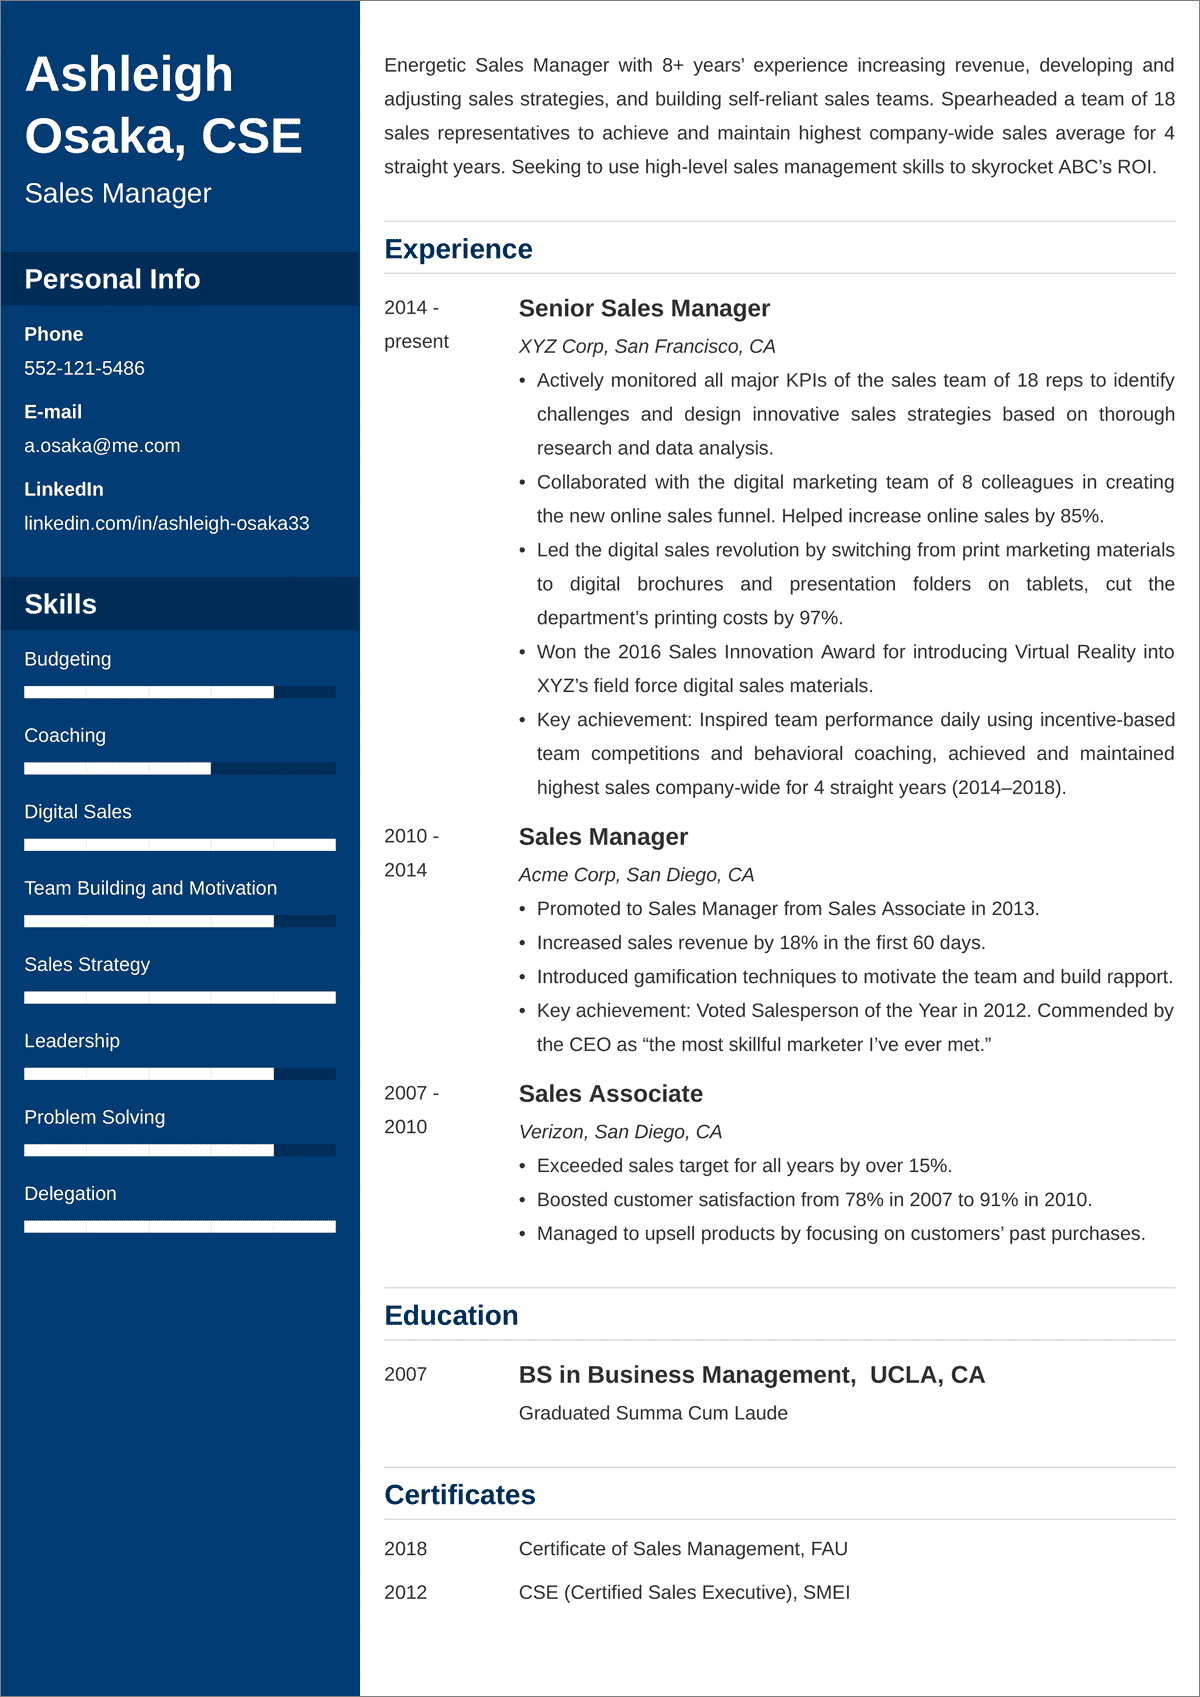 Manager CV Sample—20+ Examples and Writing Tips